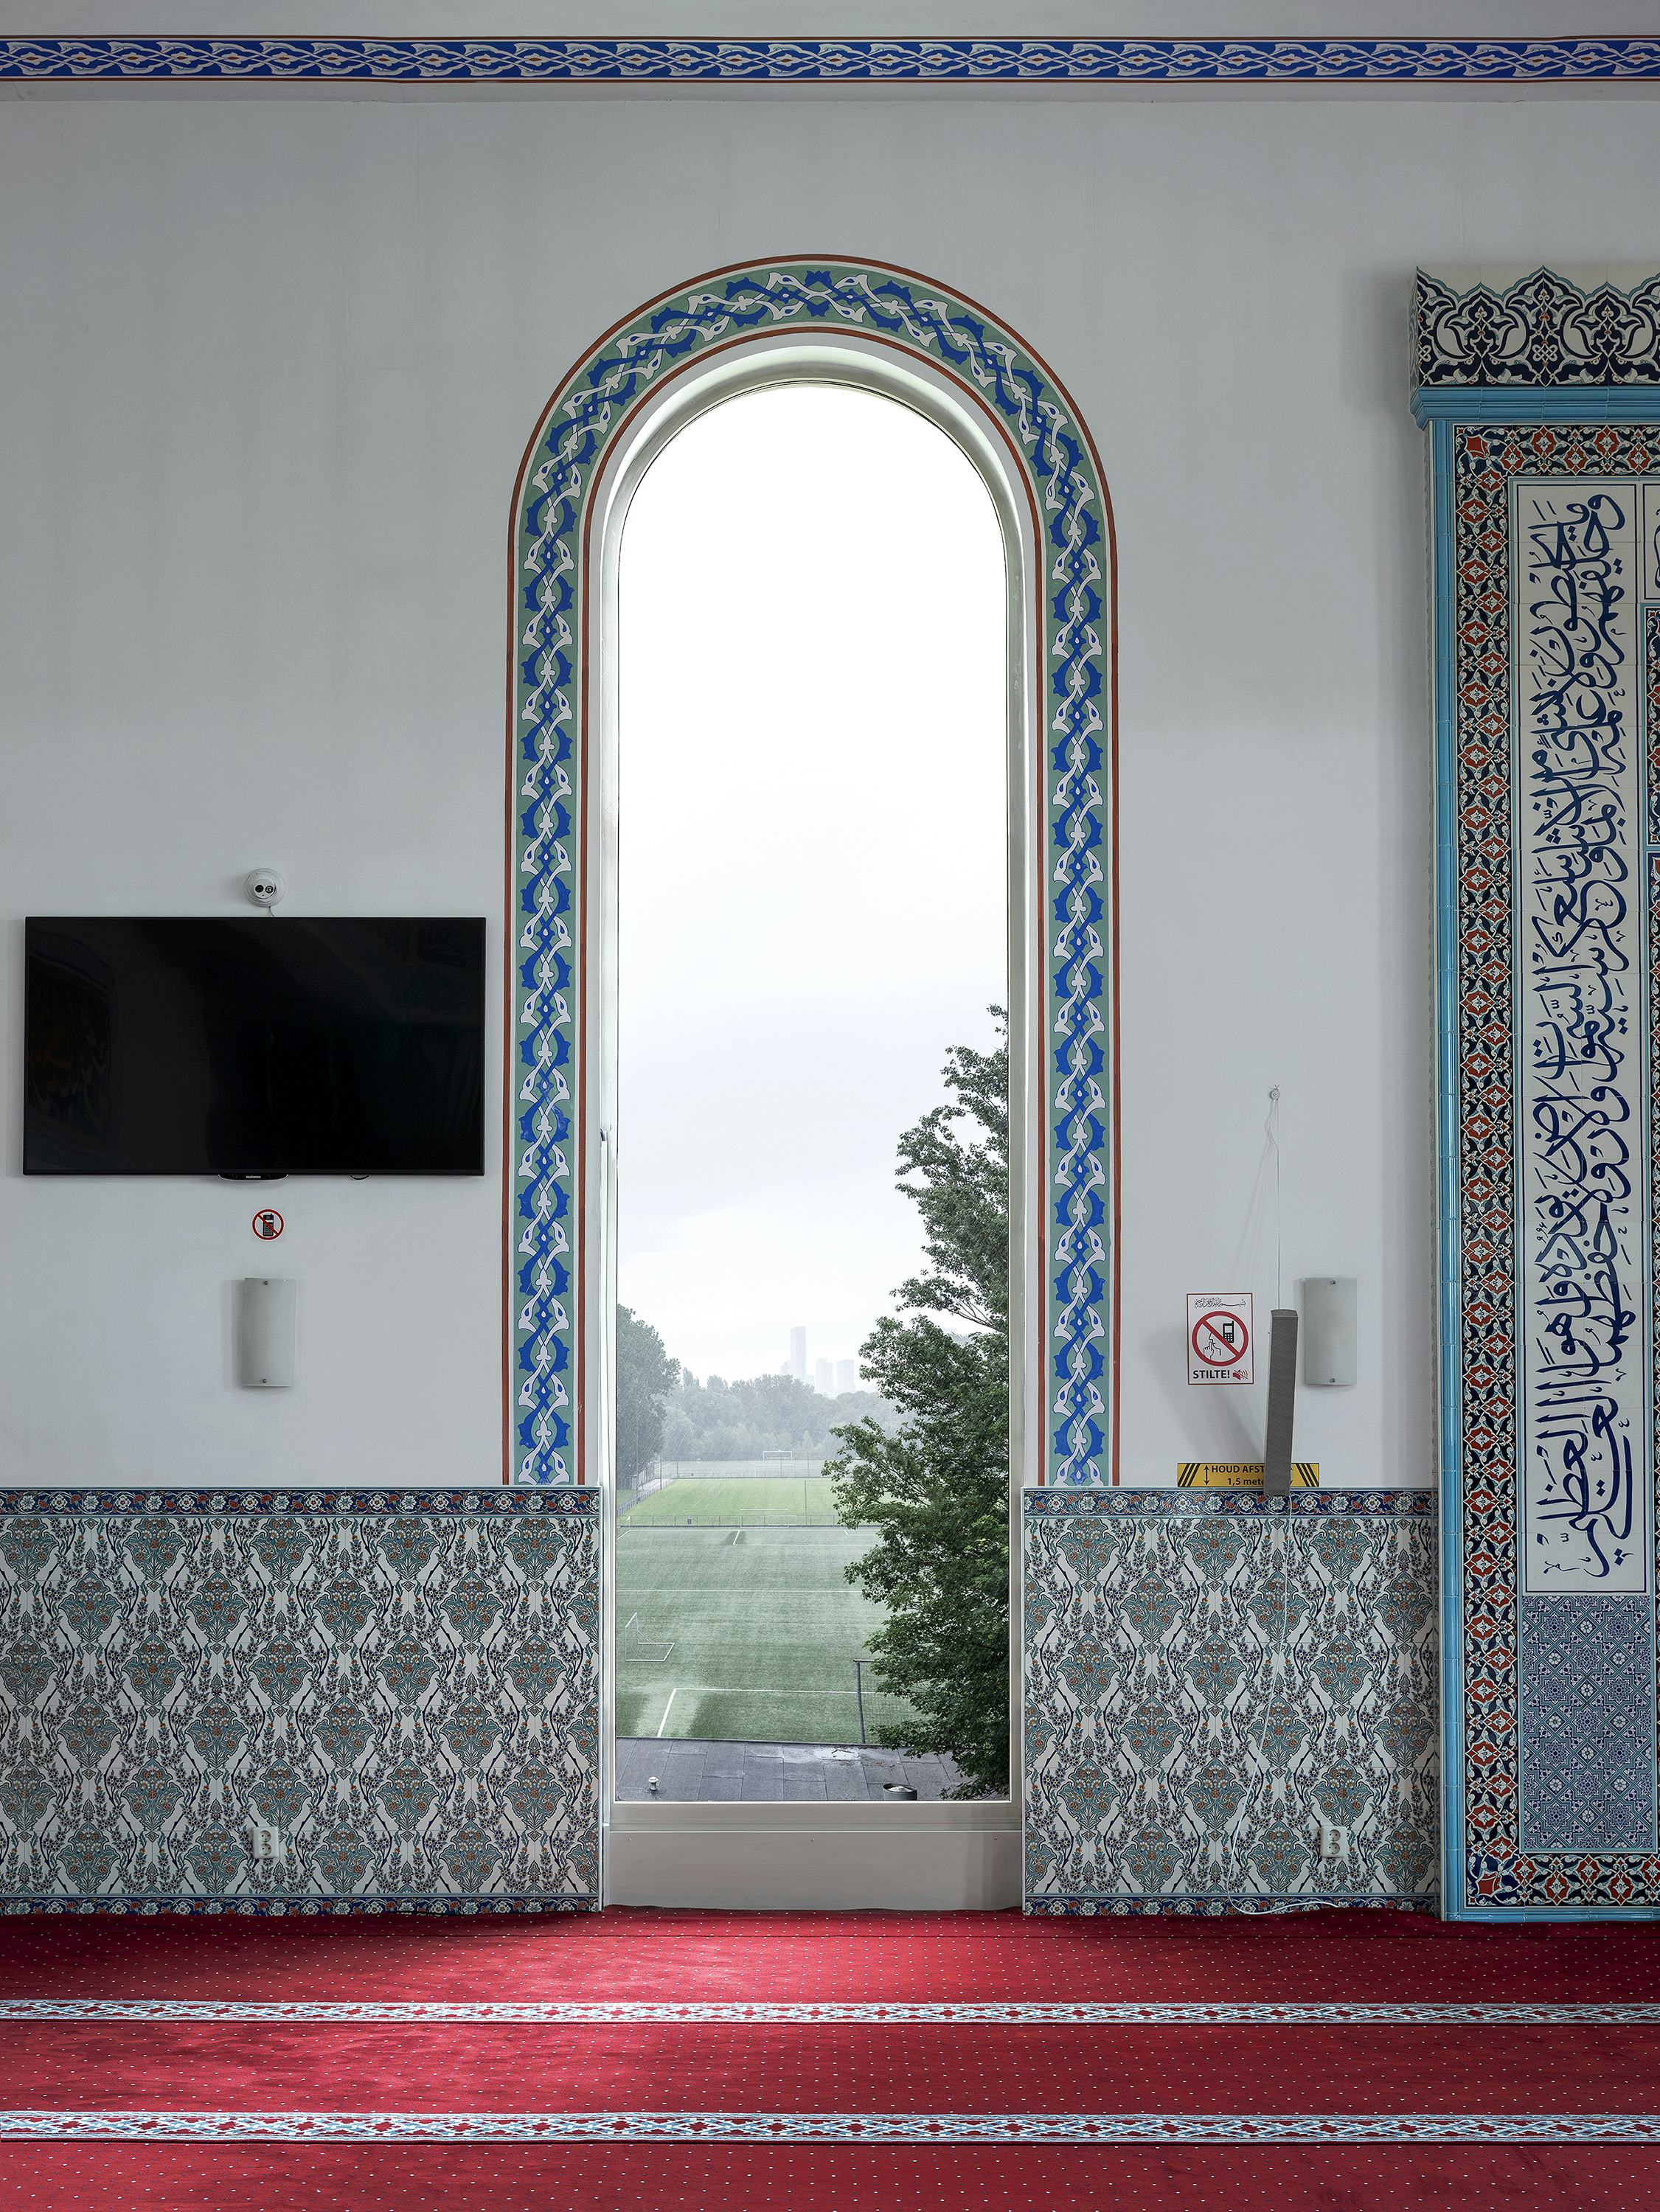 View from inside a mosque onto a Dutch landscape